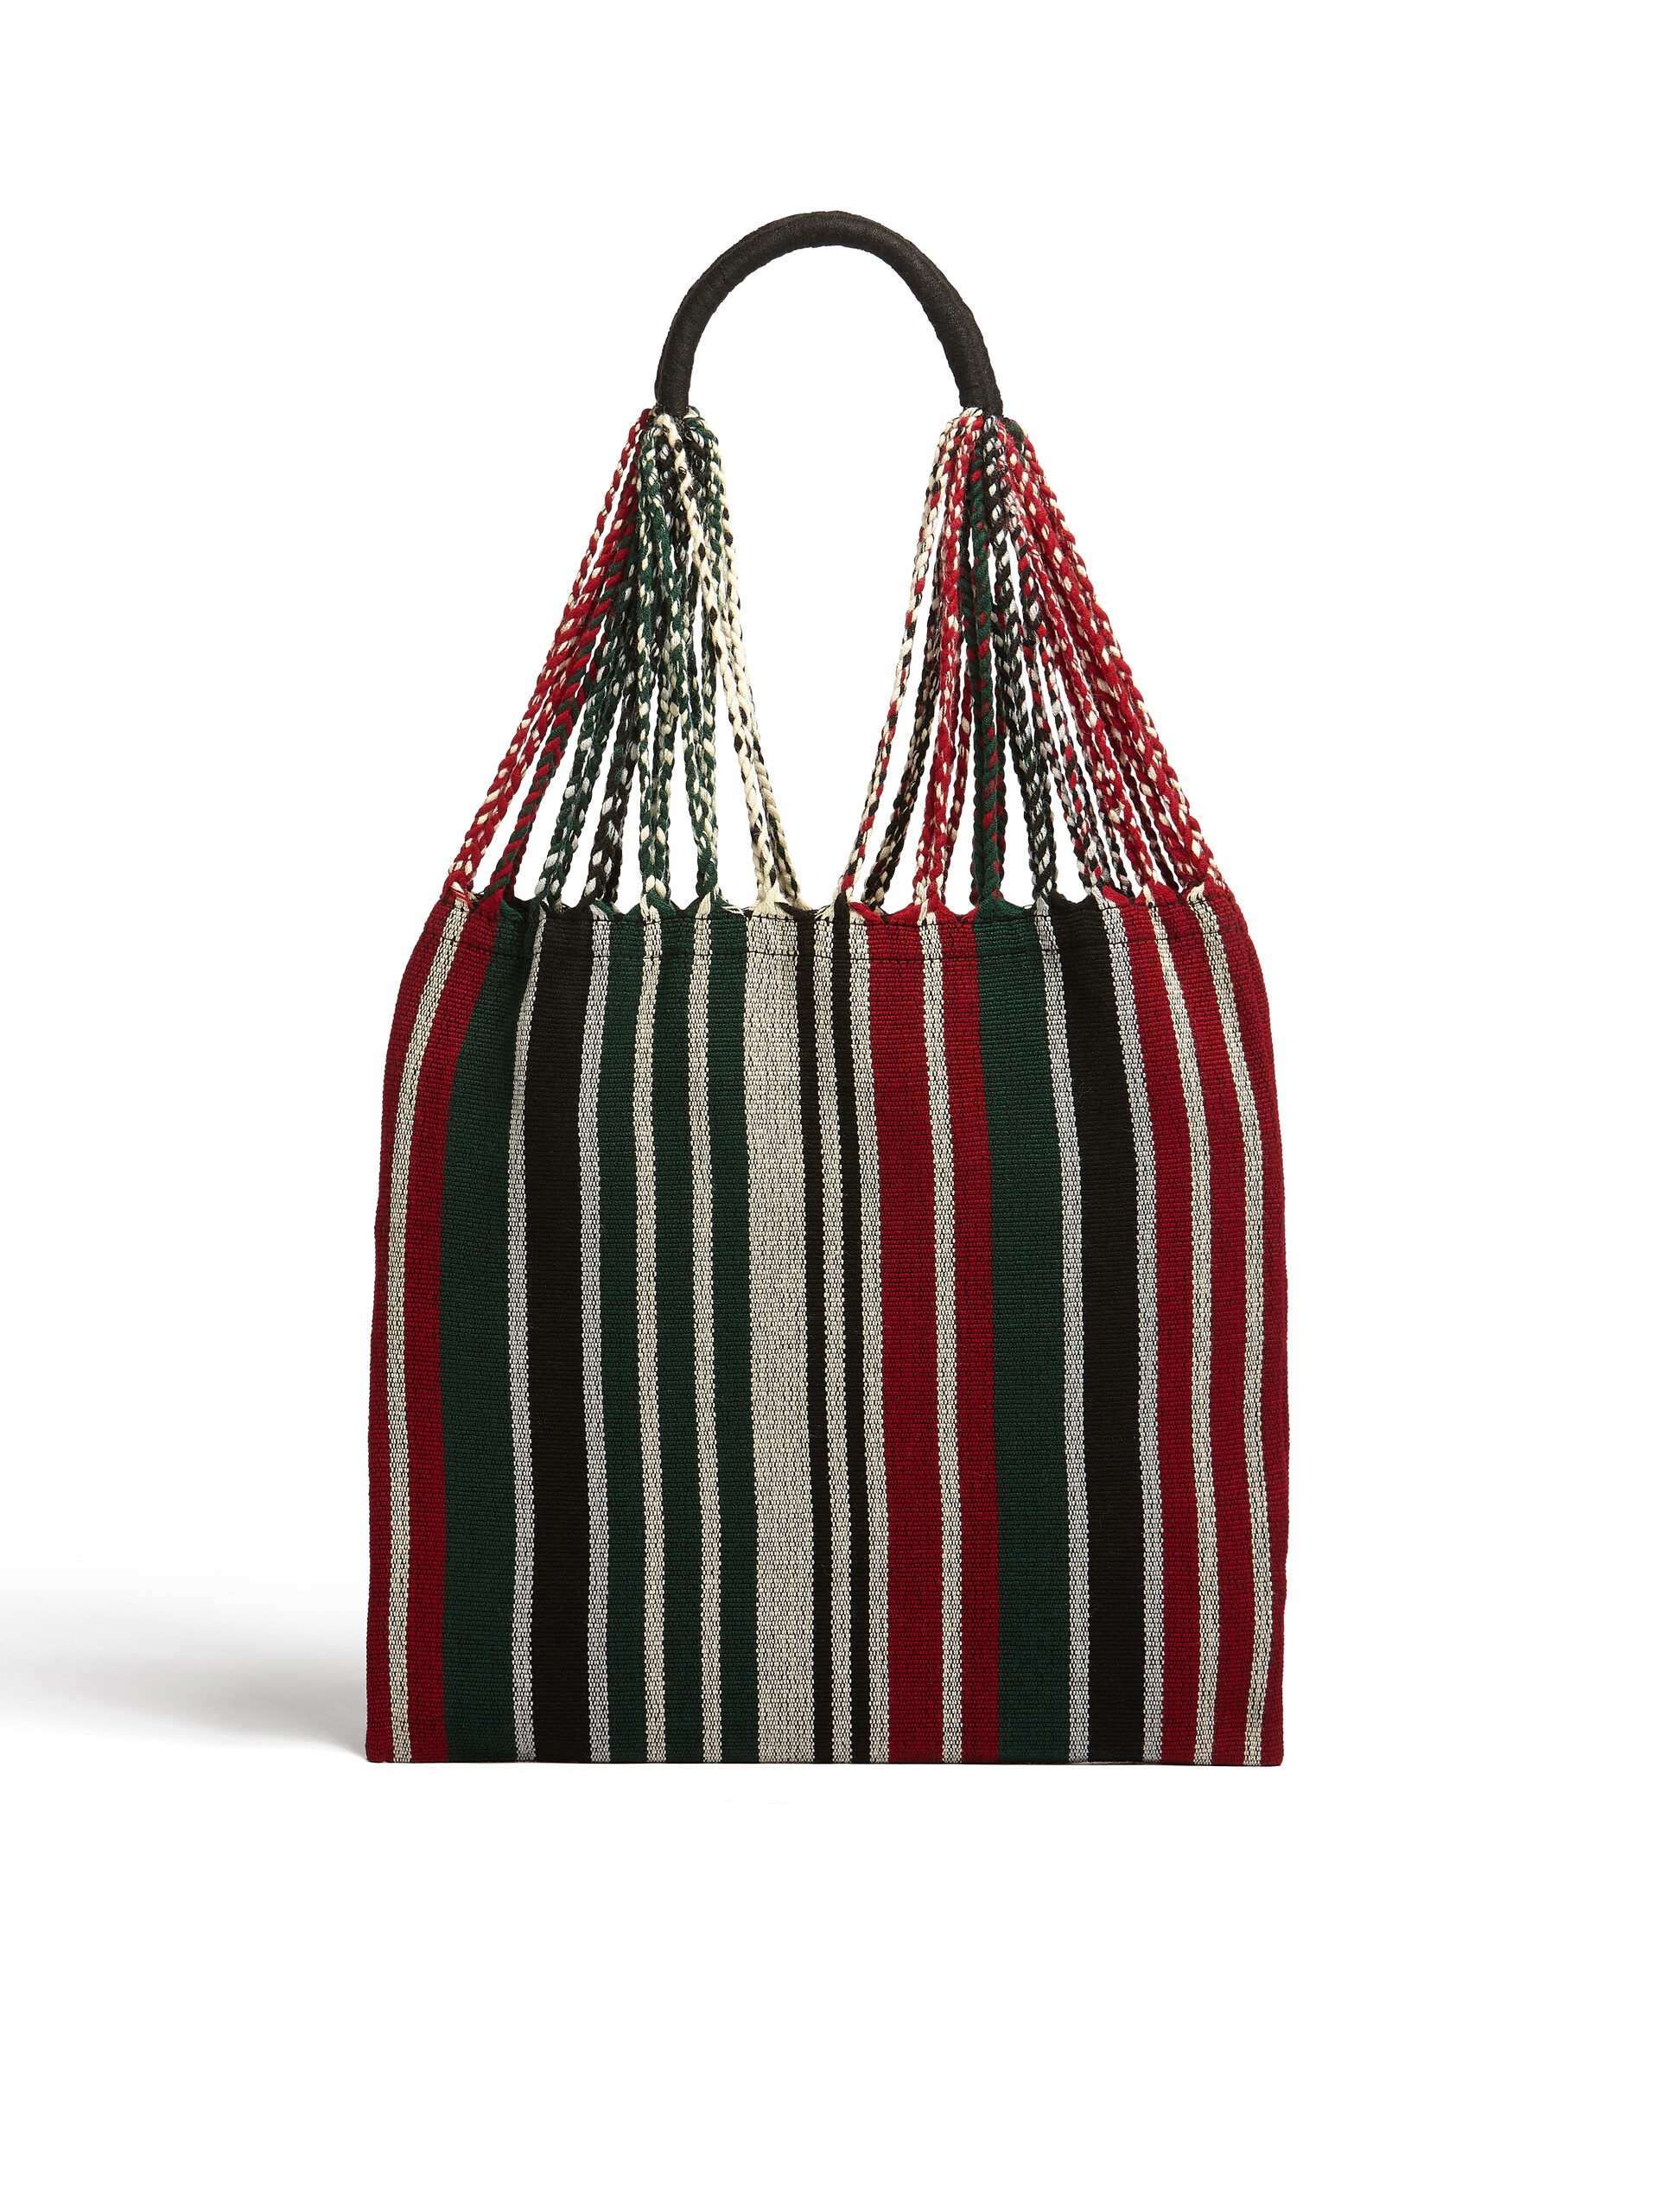 MARNI MARKET HAMMOCK bag in multicolour red polyester - Bags - Image 3